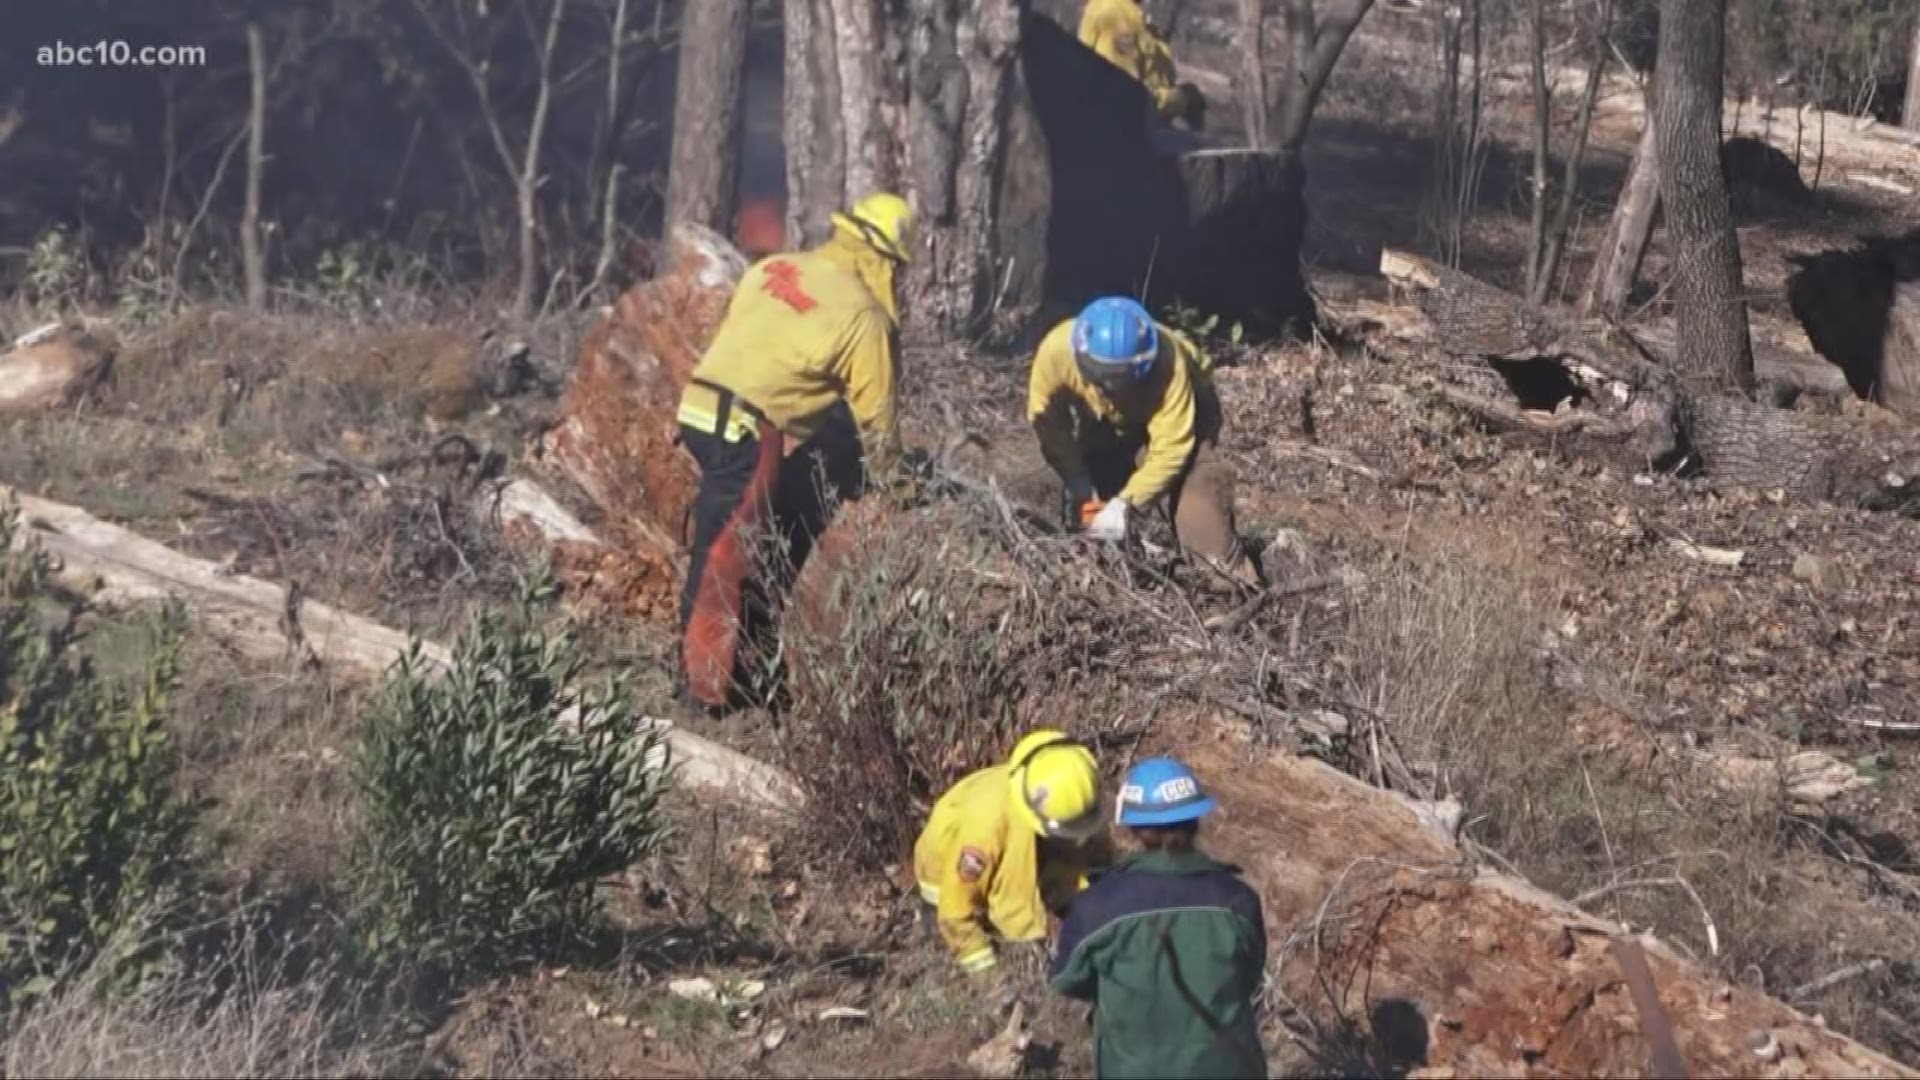 Cal Fire said Northern California is having its driest February since 1864, which makes the conditions ideal for an early wildfire season.